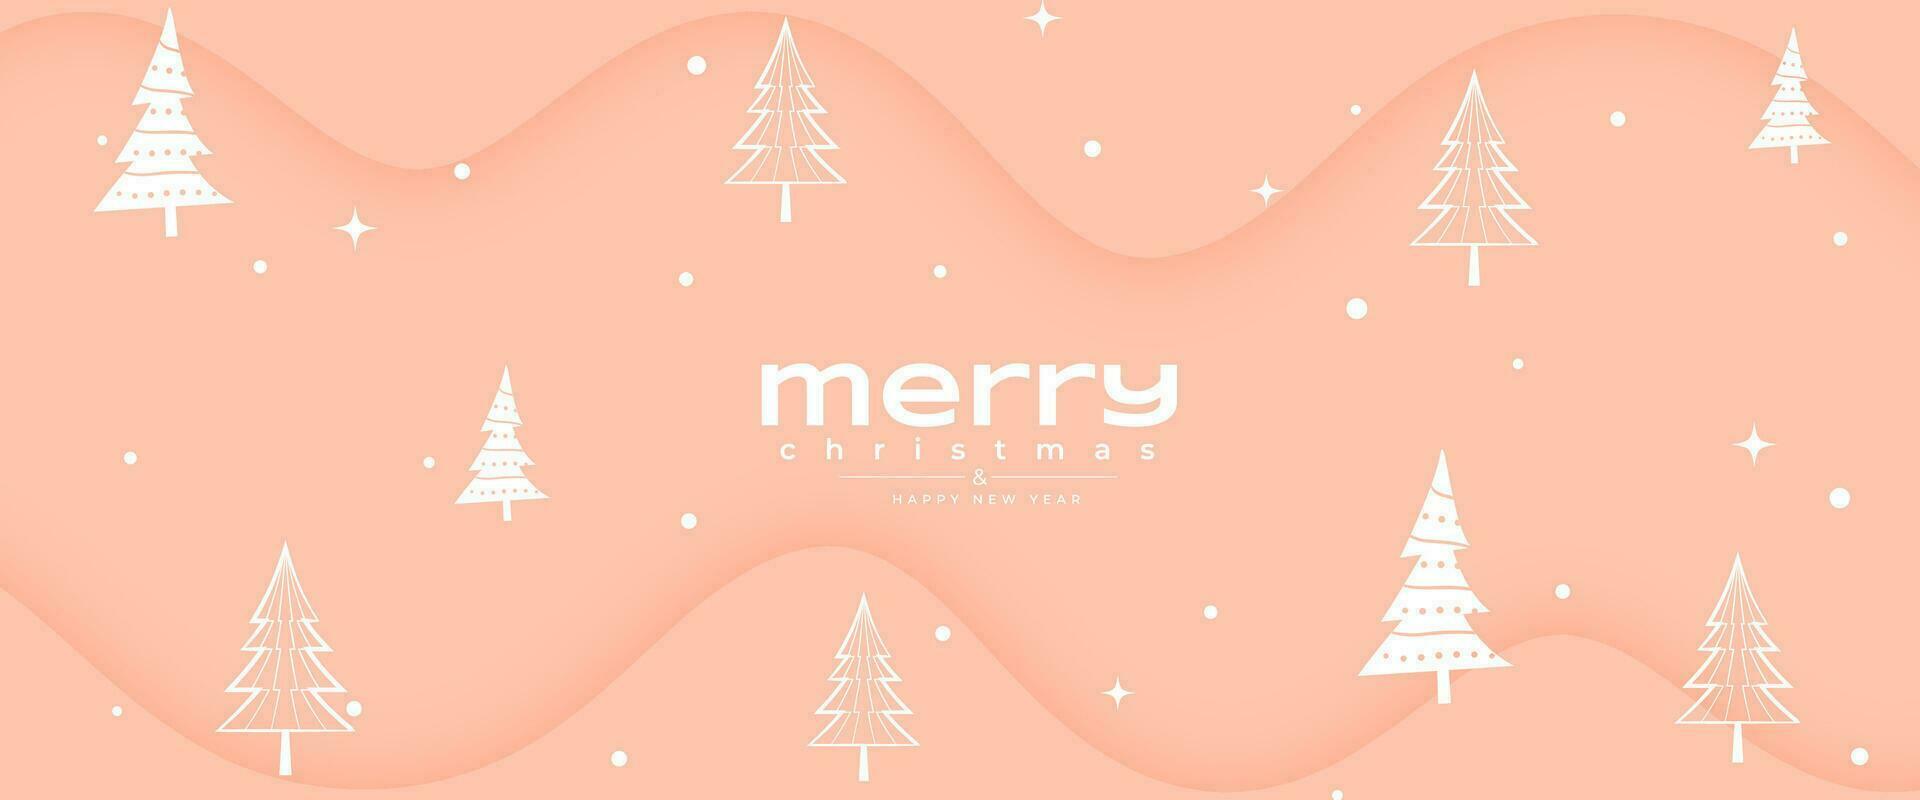 elegant merry christmas and new year eve banner with xmas tree decor vector